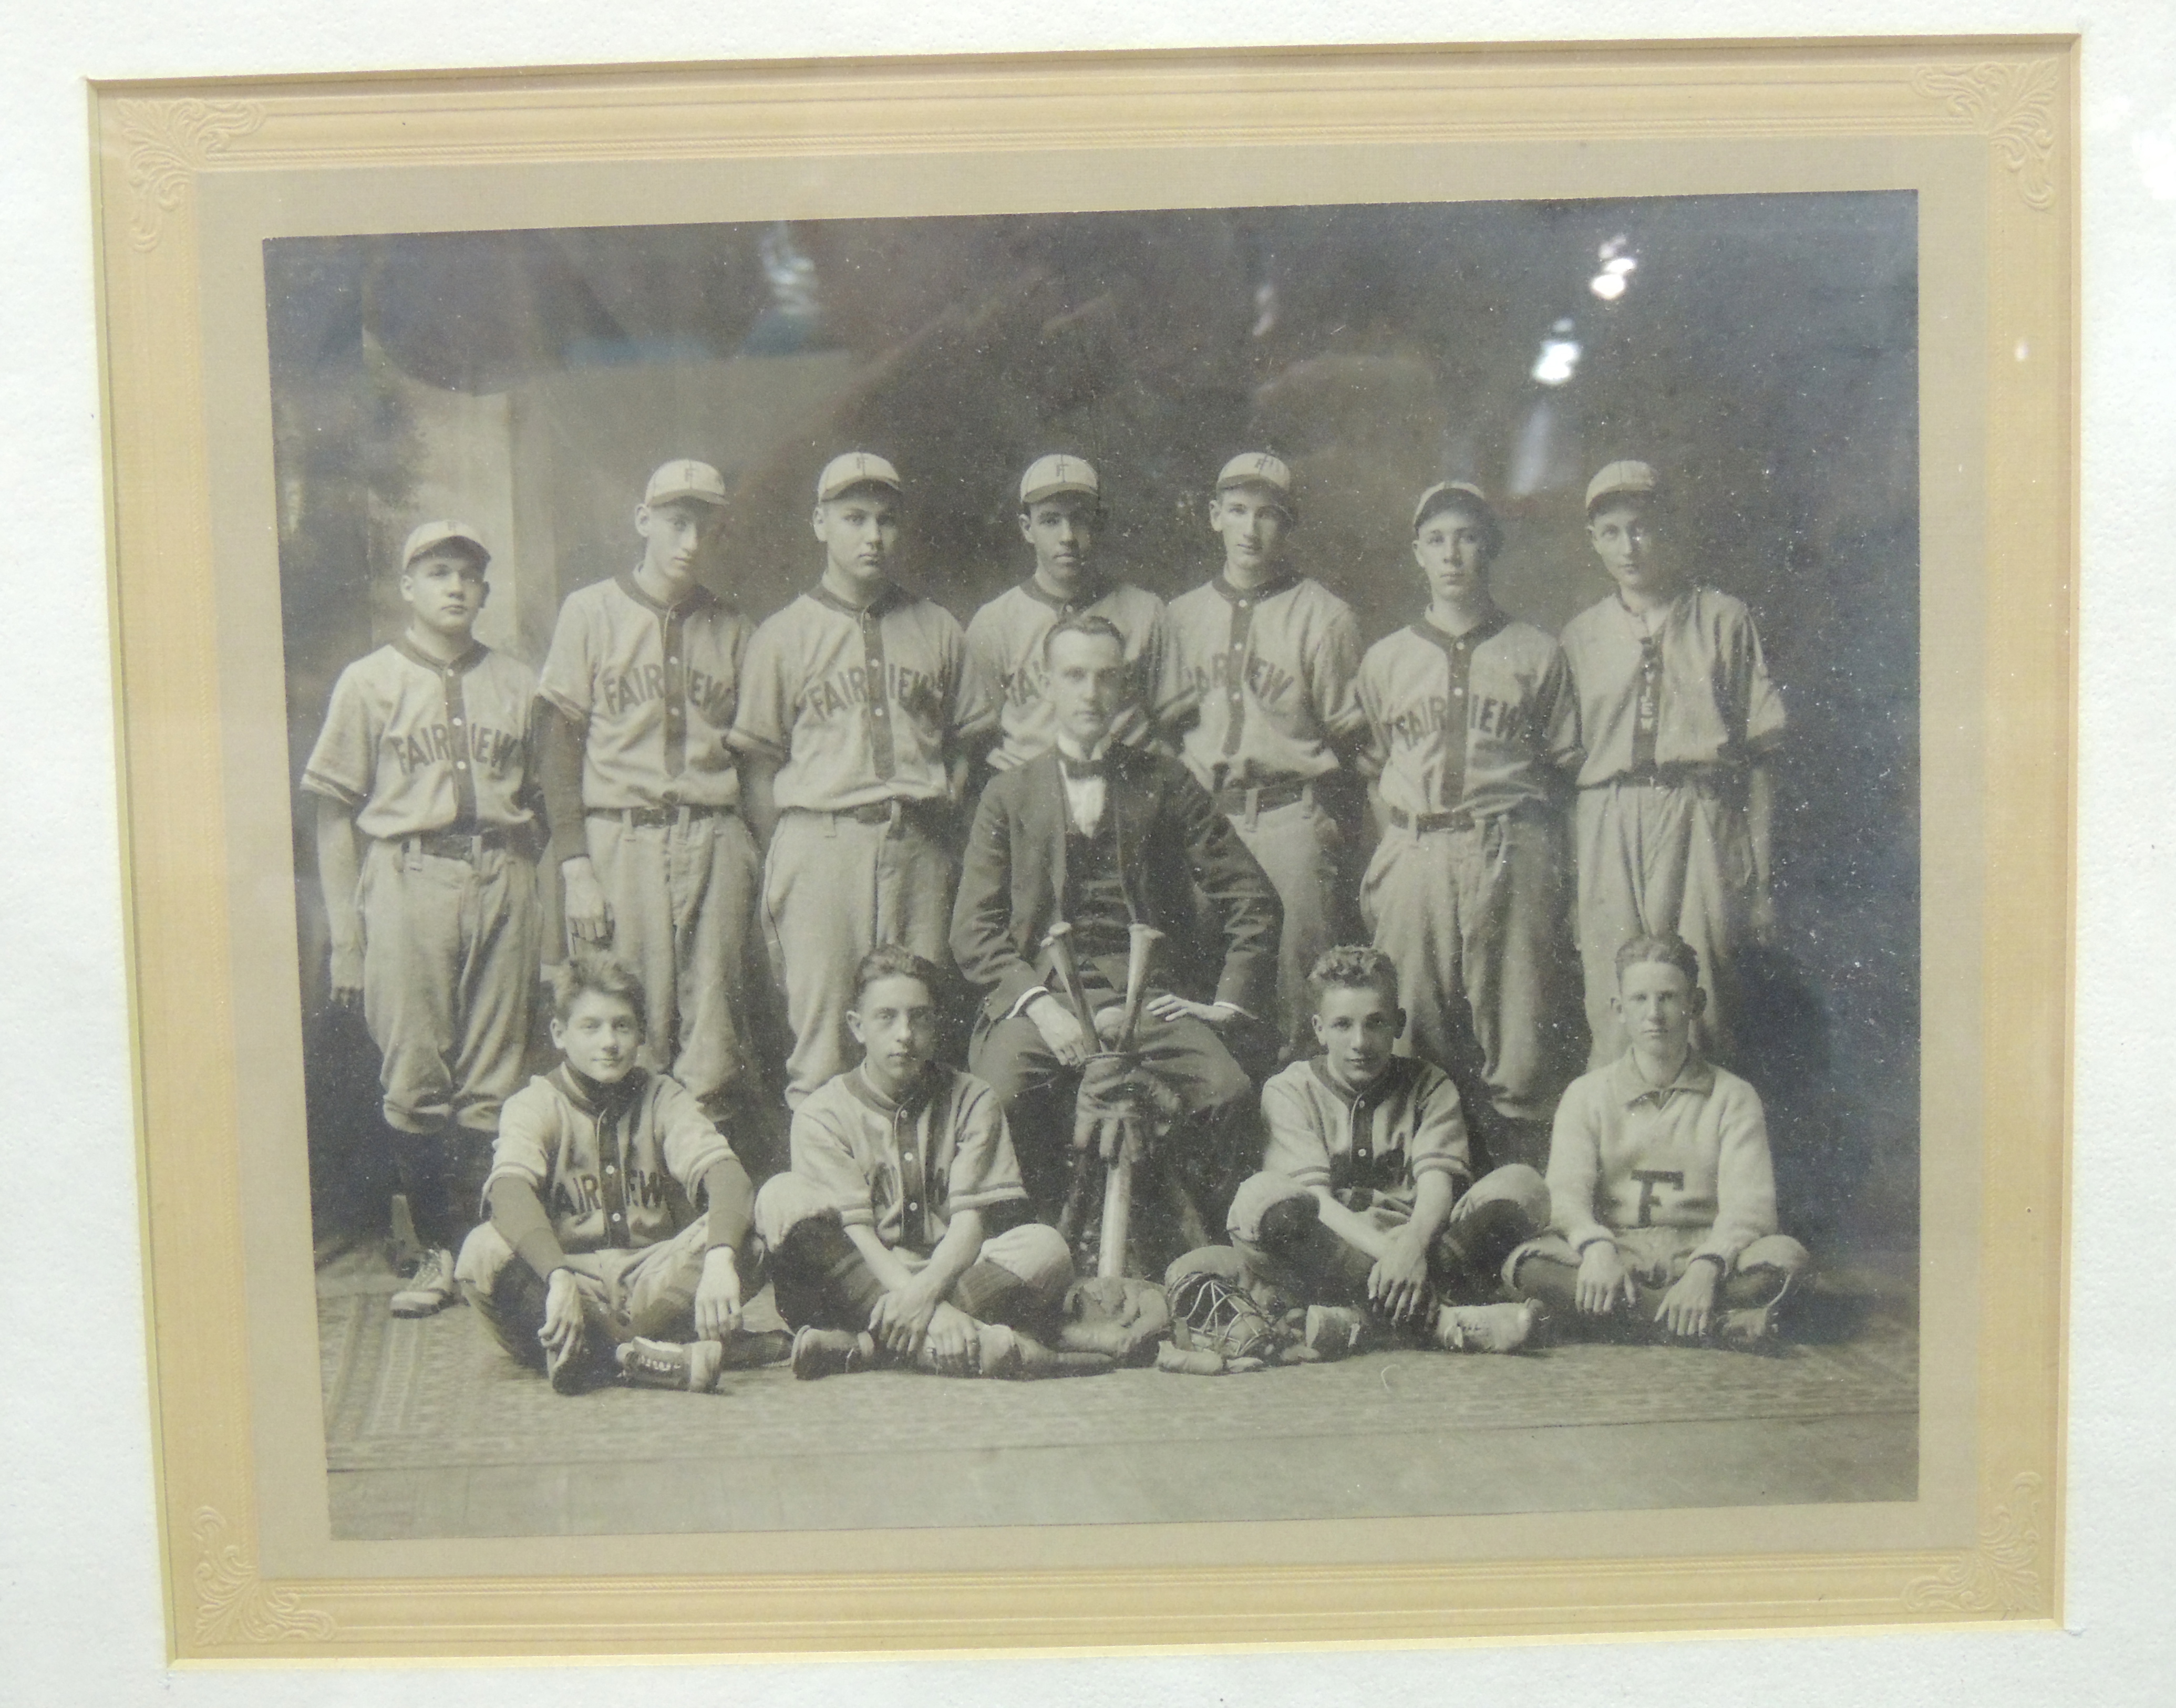 There is no date or  identification for this Fairview baseball team photo.  It appears to be circa early 1900's.  Please contact us if you have details about this team.  Photo Dennis Huddleston, Class of 1965.